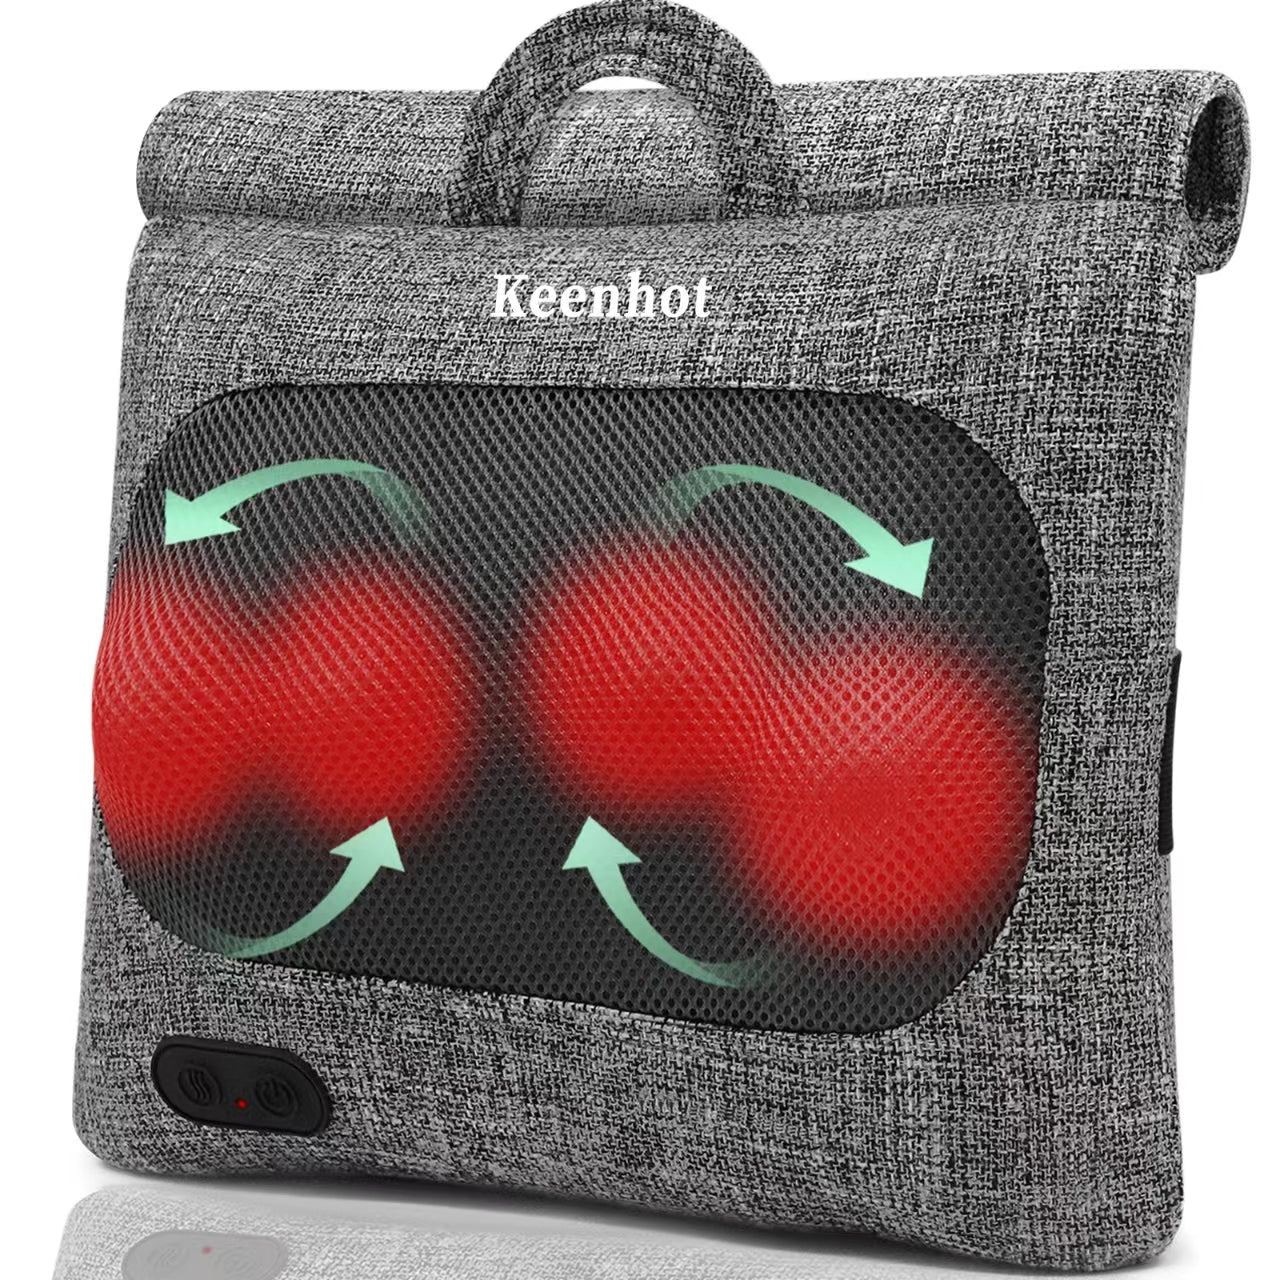 Keenhot Back Massager for Back and Neck Relaxation